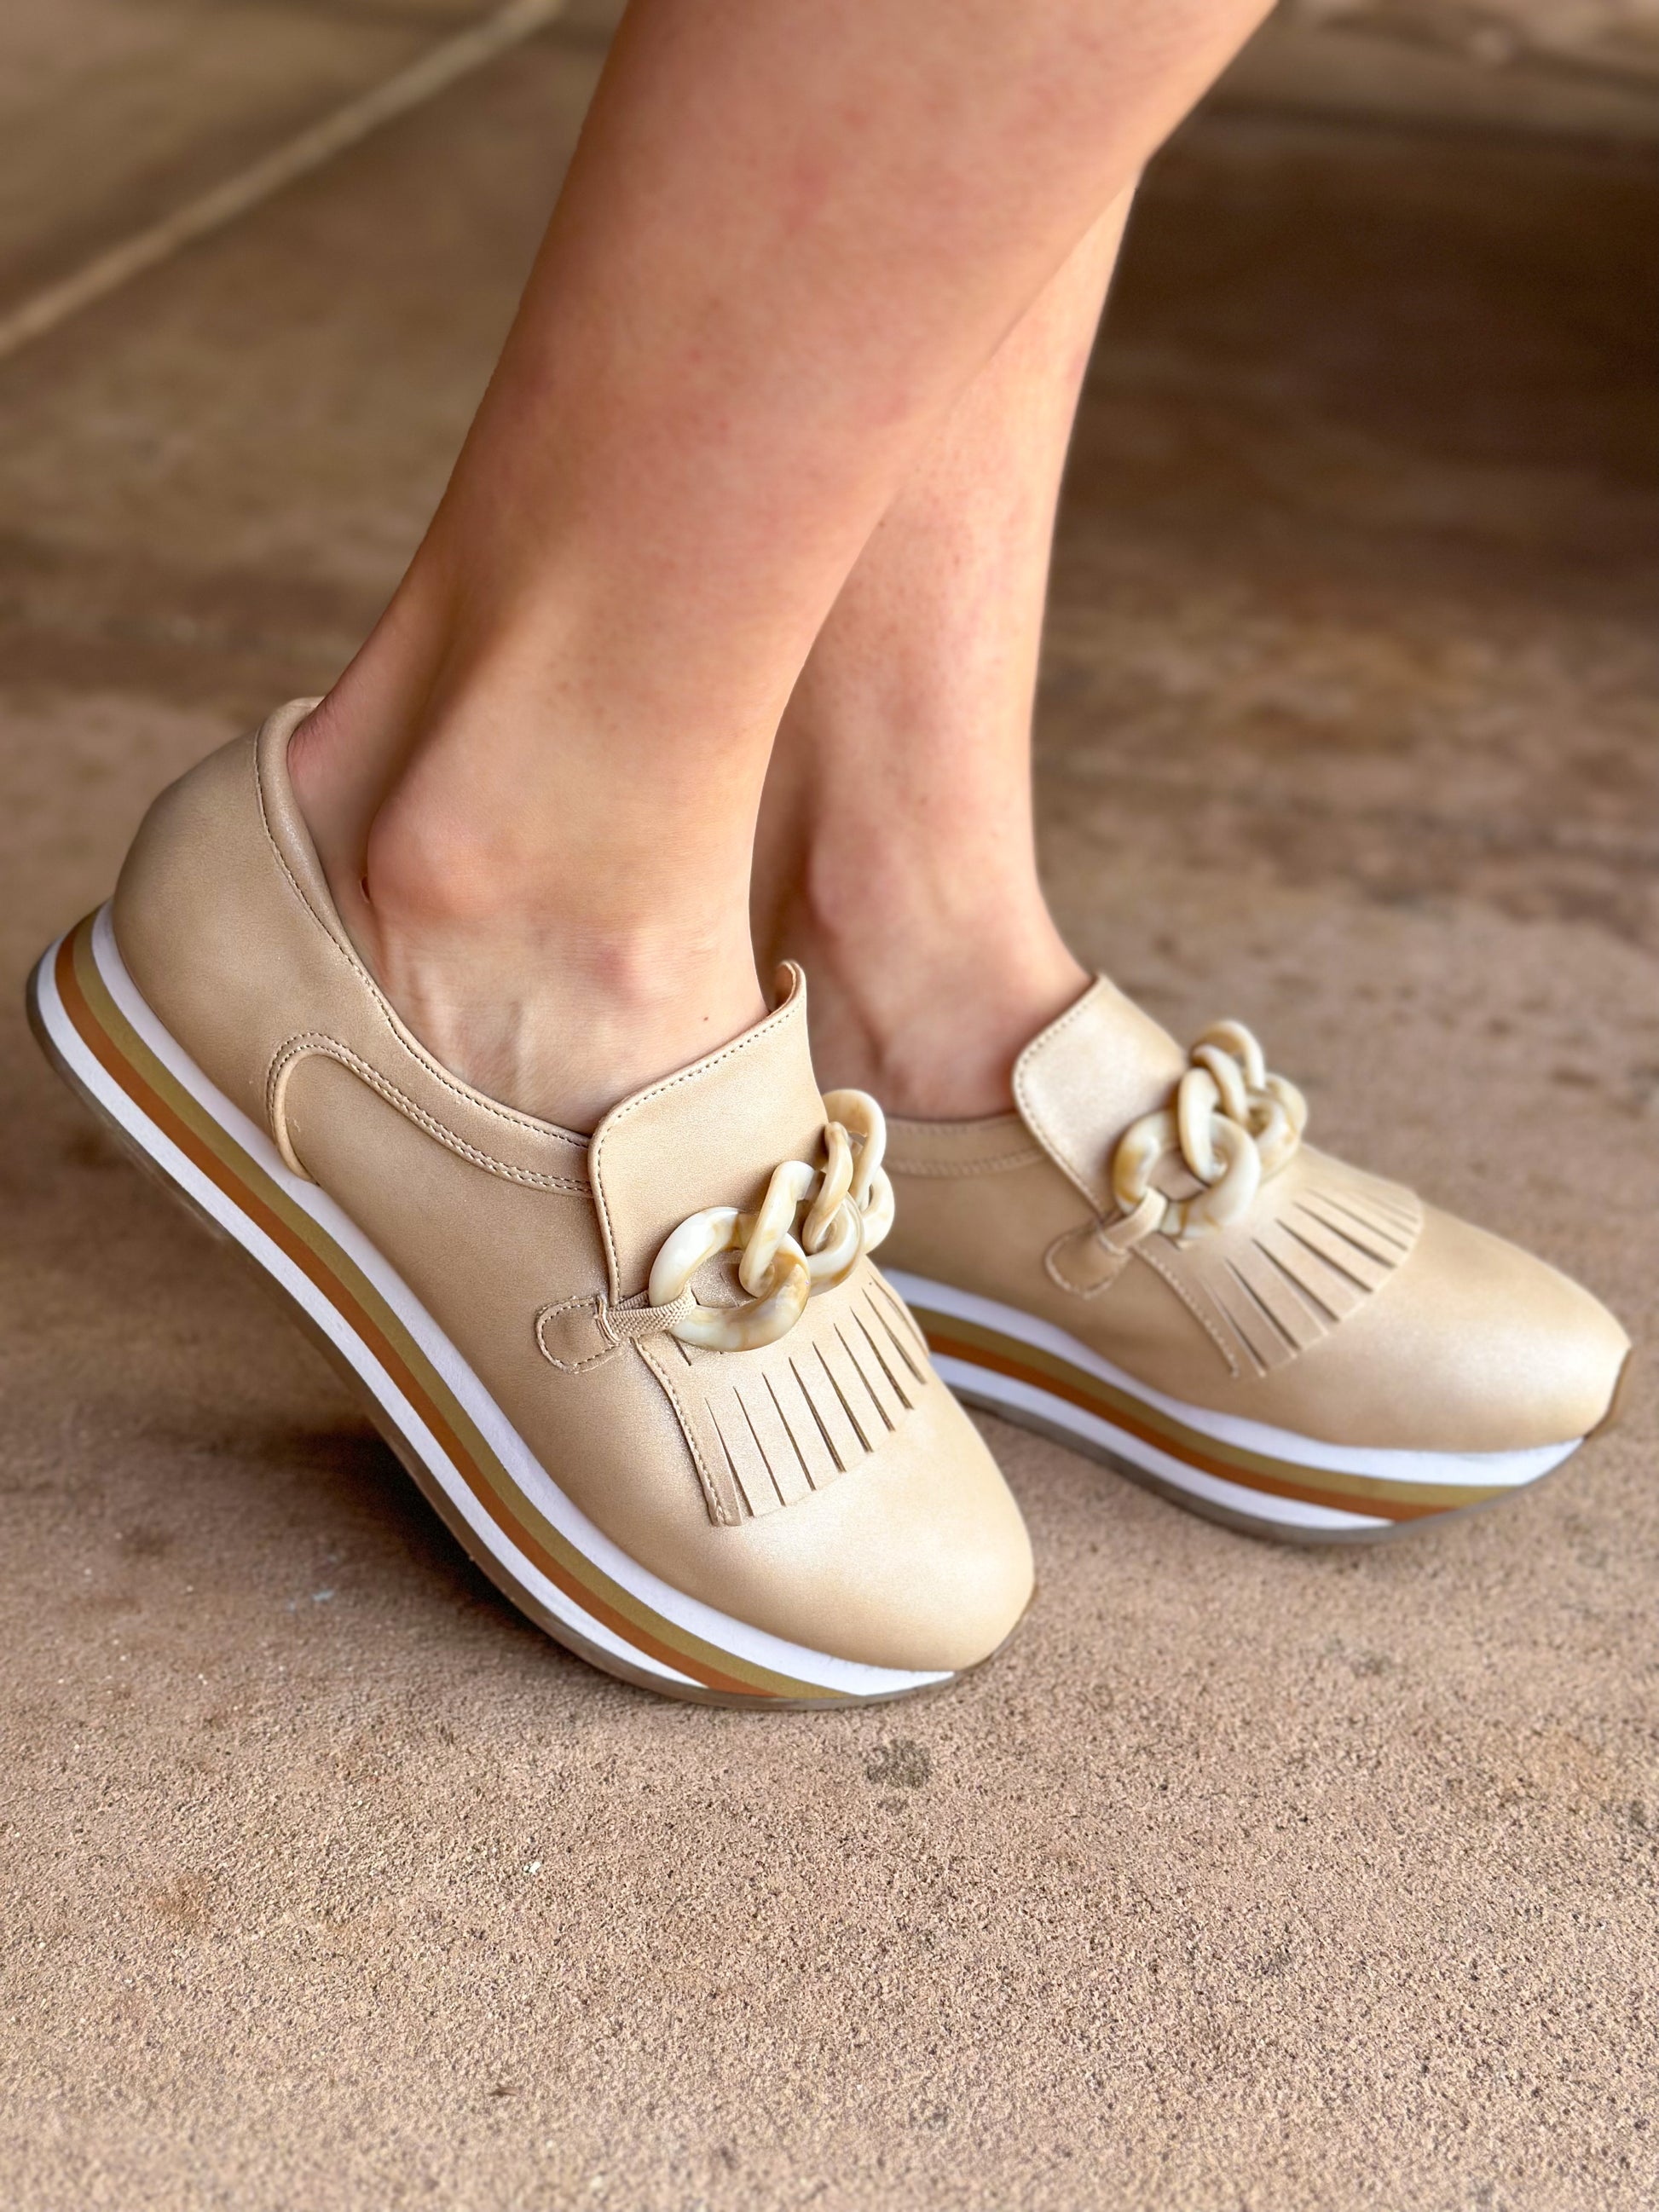 Bess - Natural Frost Shoes Matisse   